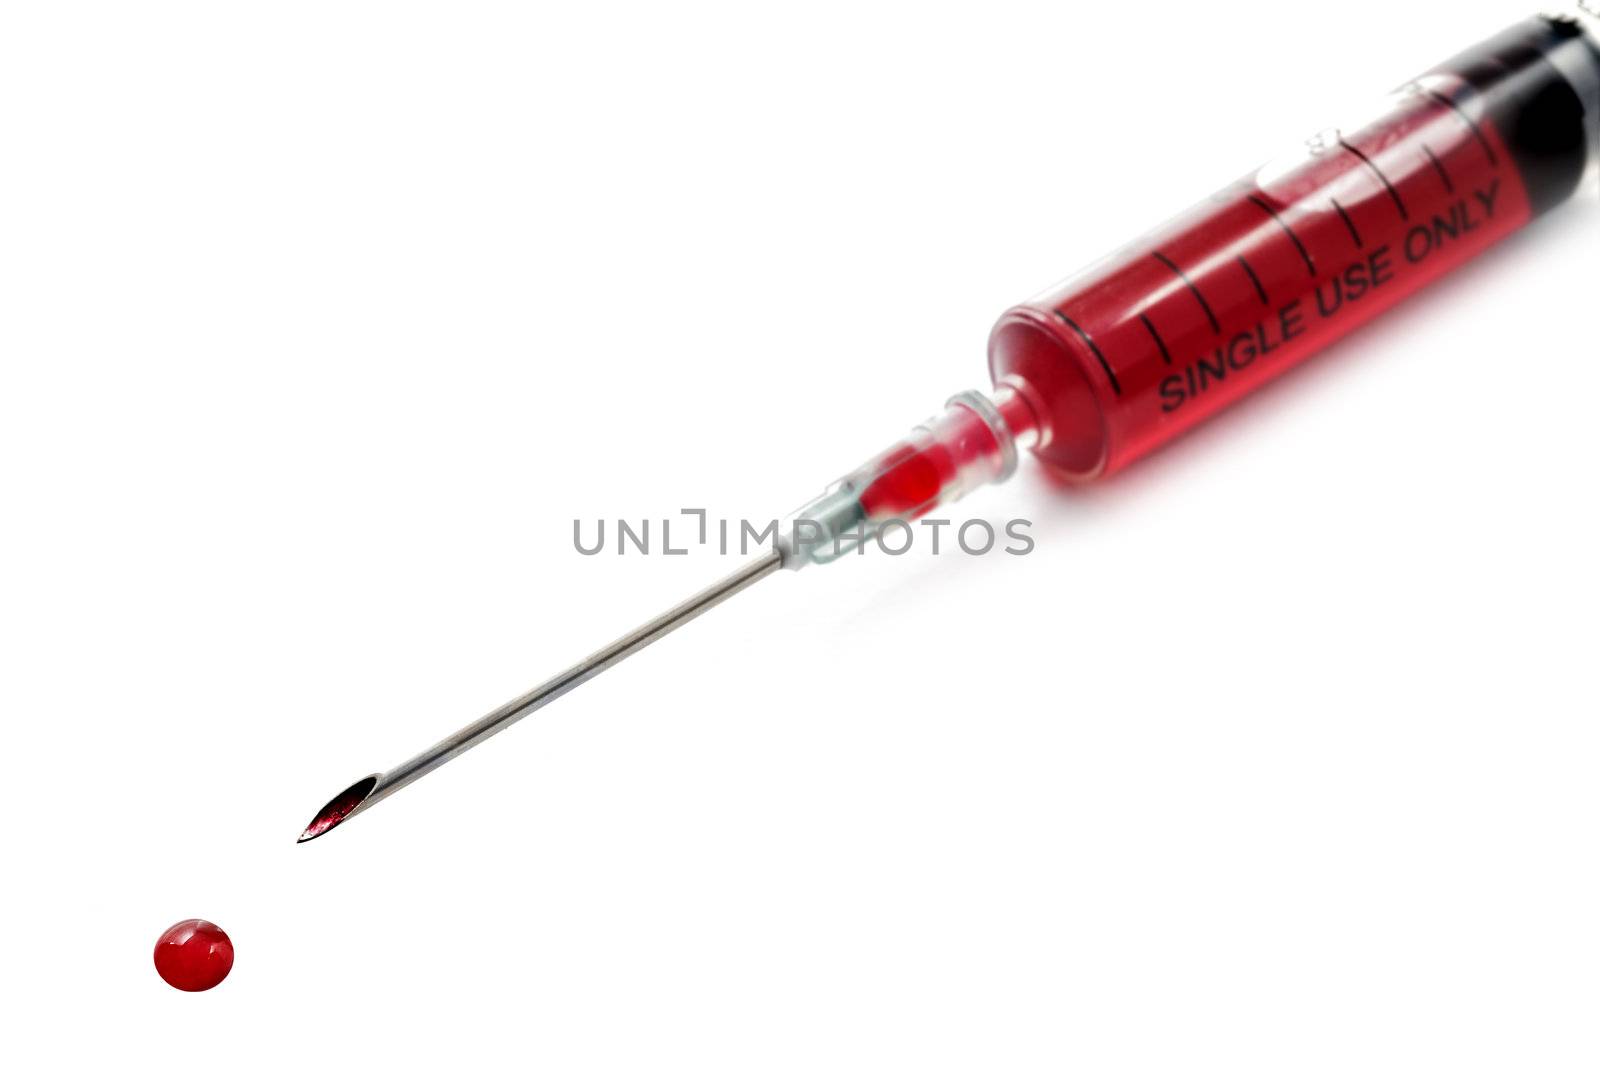 Syringe and needle filled with blood by tish1